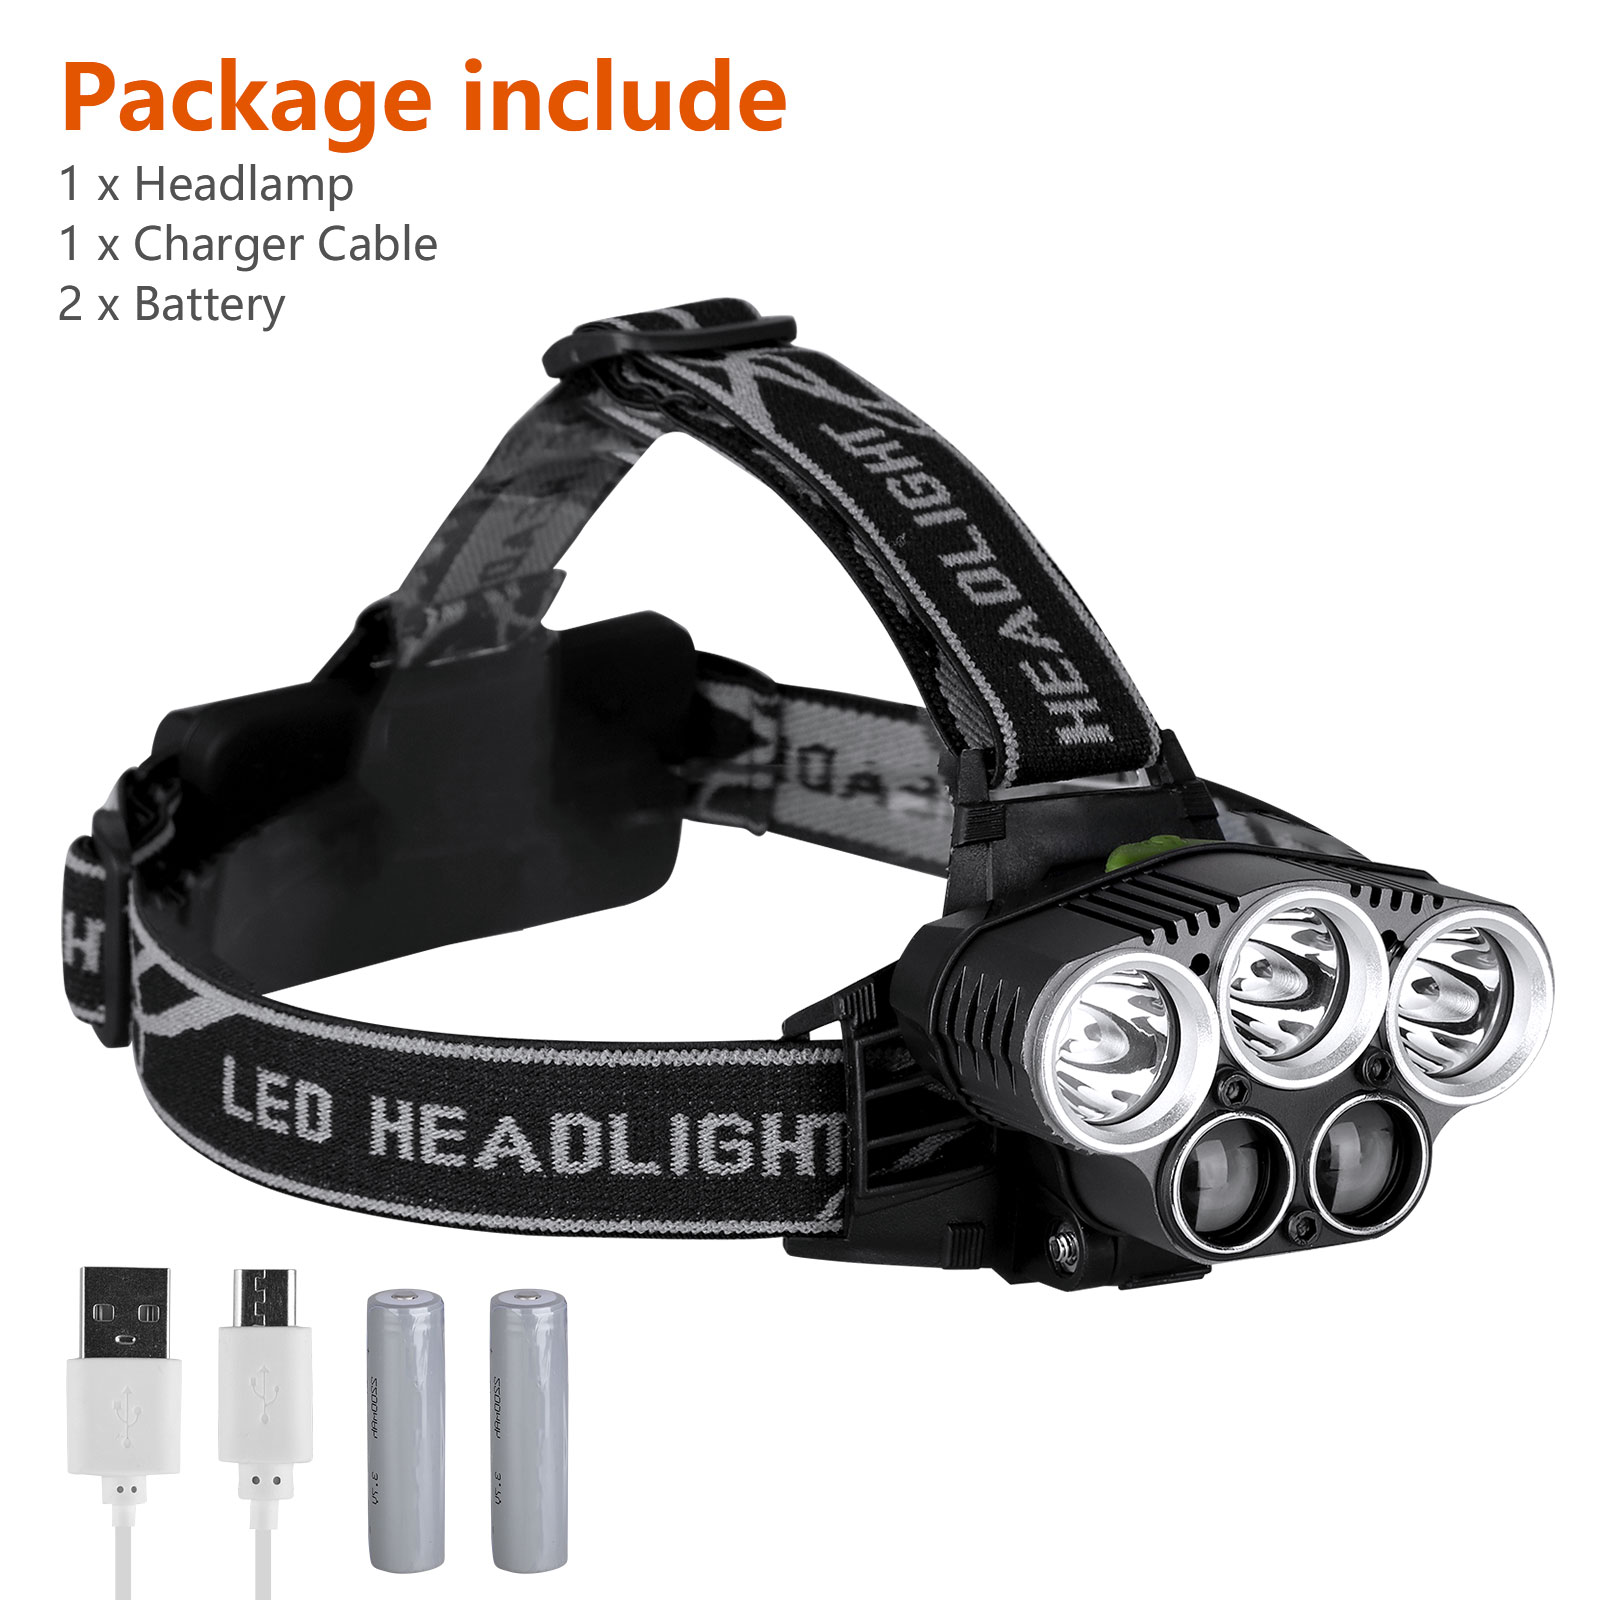 Hunting Red Light Headlamp Zoomable LED Headlight with Lighting Mode and Water Resistant for Running Camping Hiking Reading. - 5